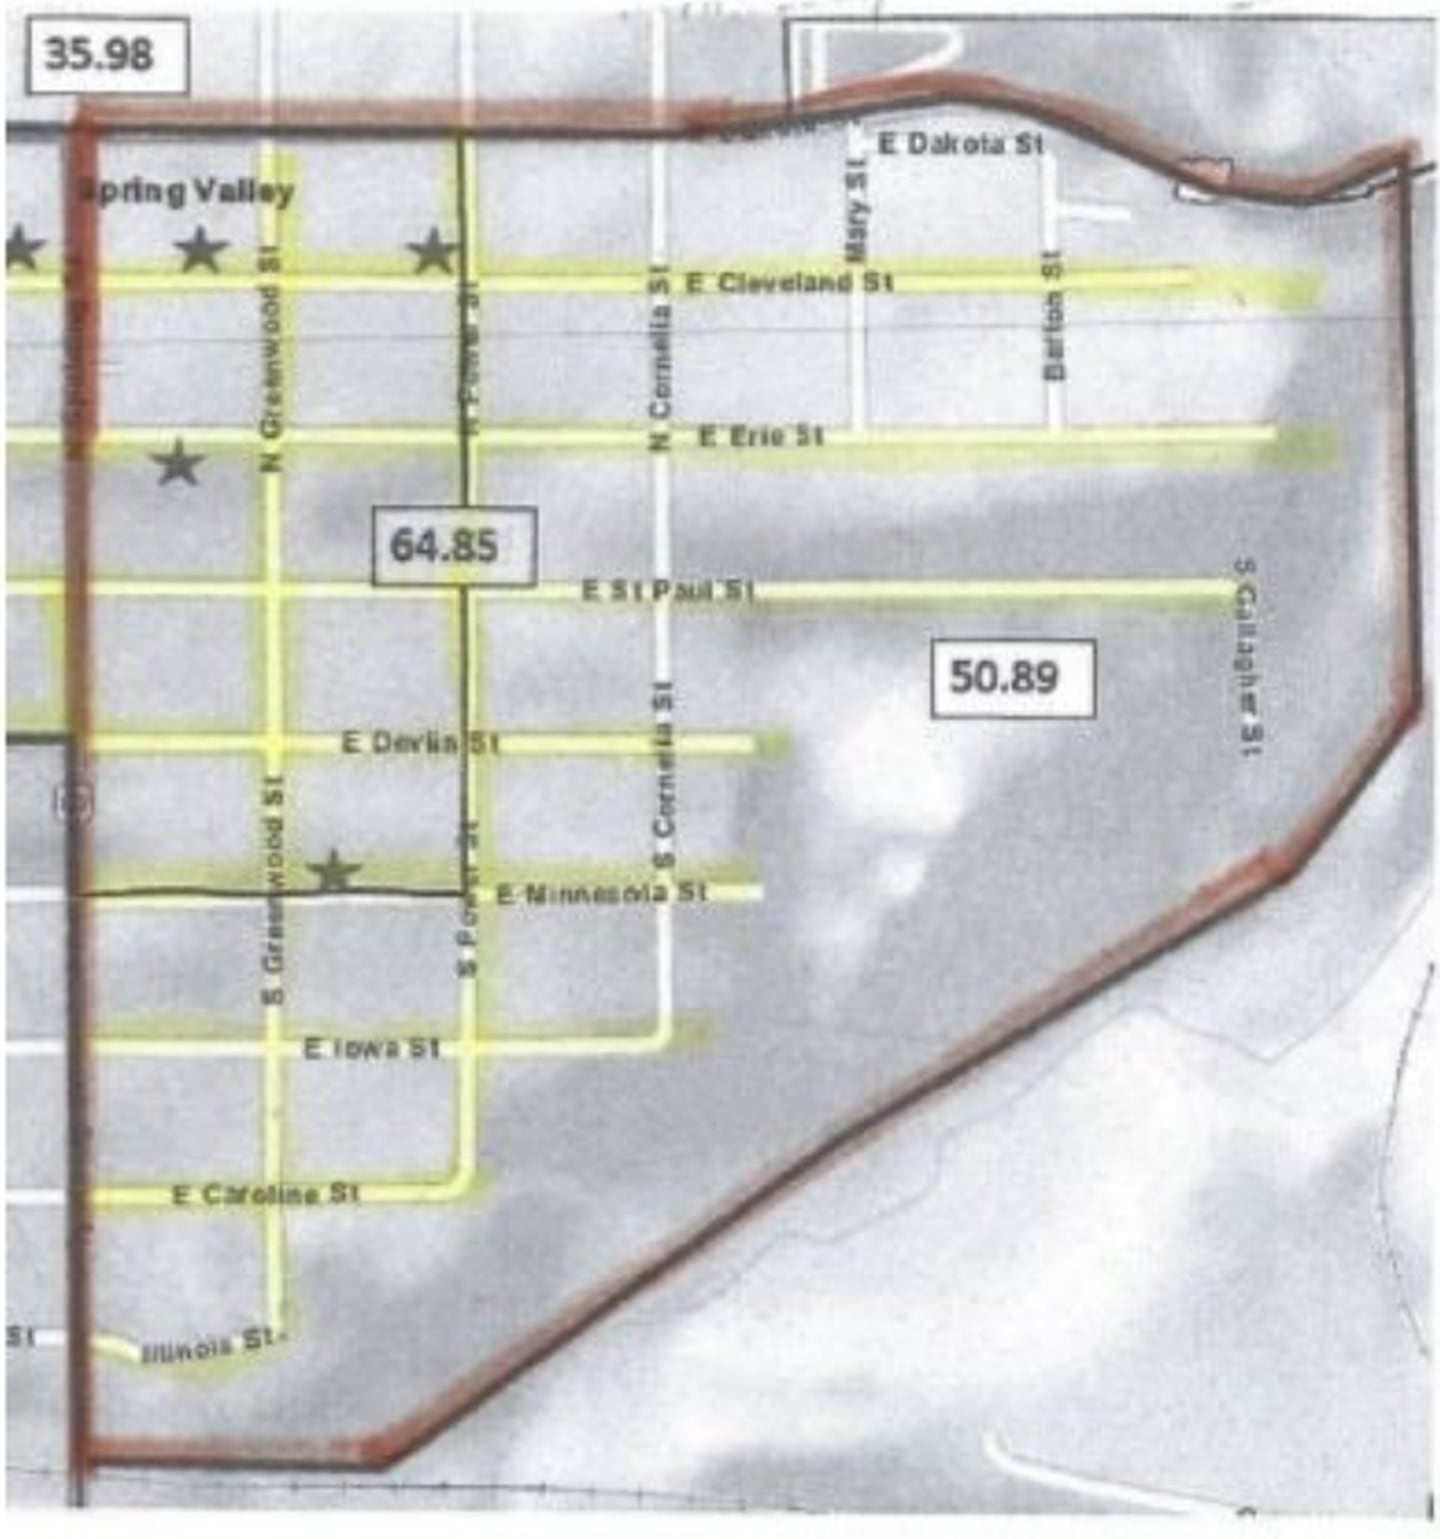 A map of the area that would be the recipient of a neighborhood improvement grant in Spring Valley.